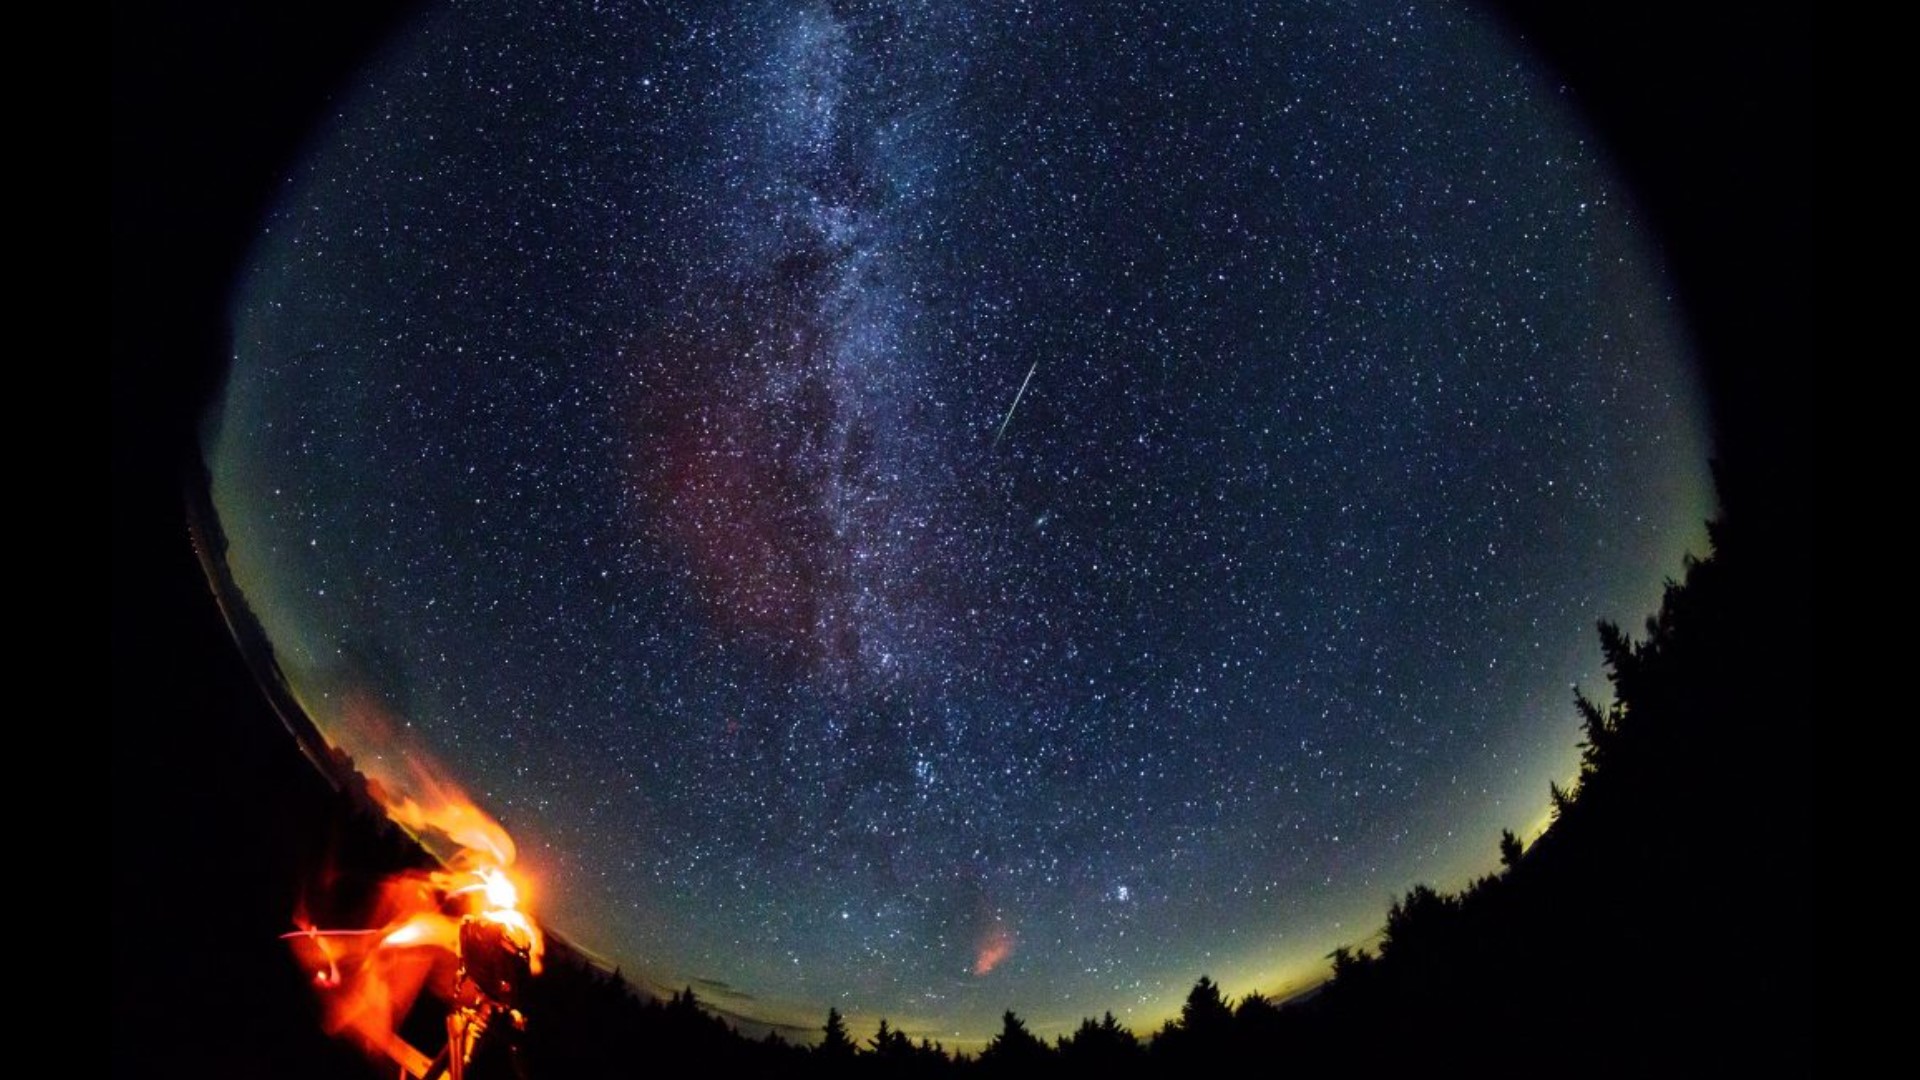 It's one of the biggest meteor showers of the year and can best be seen between midnight and 4 am.